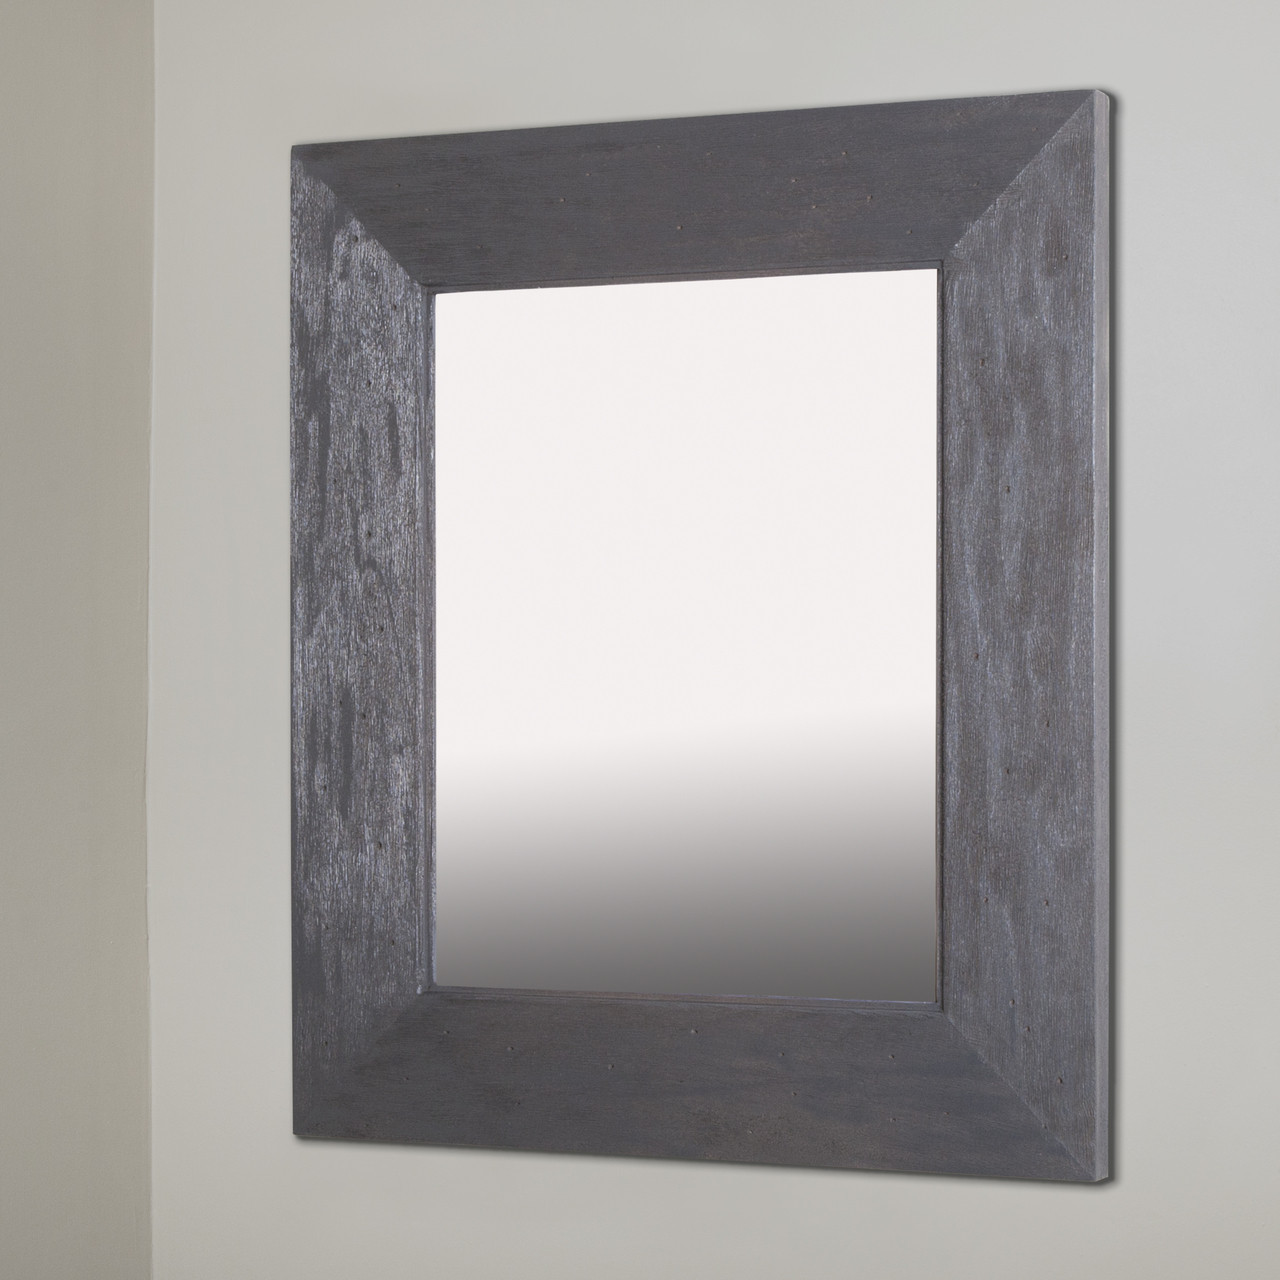 Regular White Concealed Cabinet Recessed In Wall Picture Frame